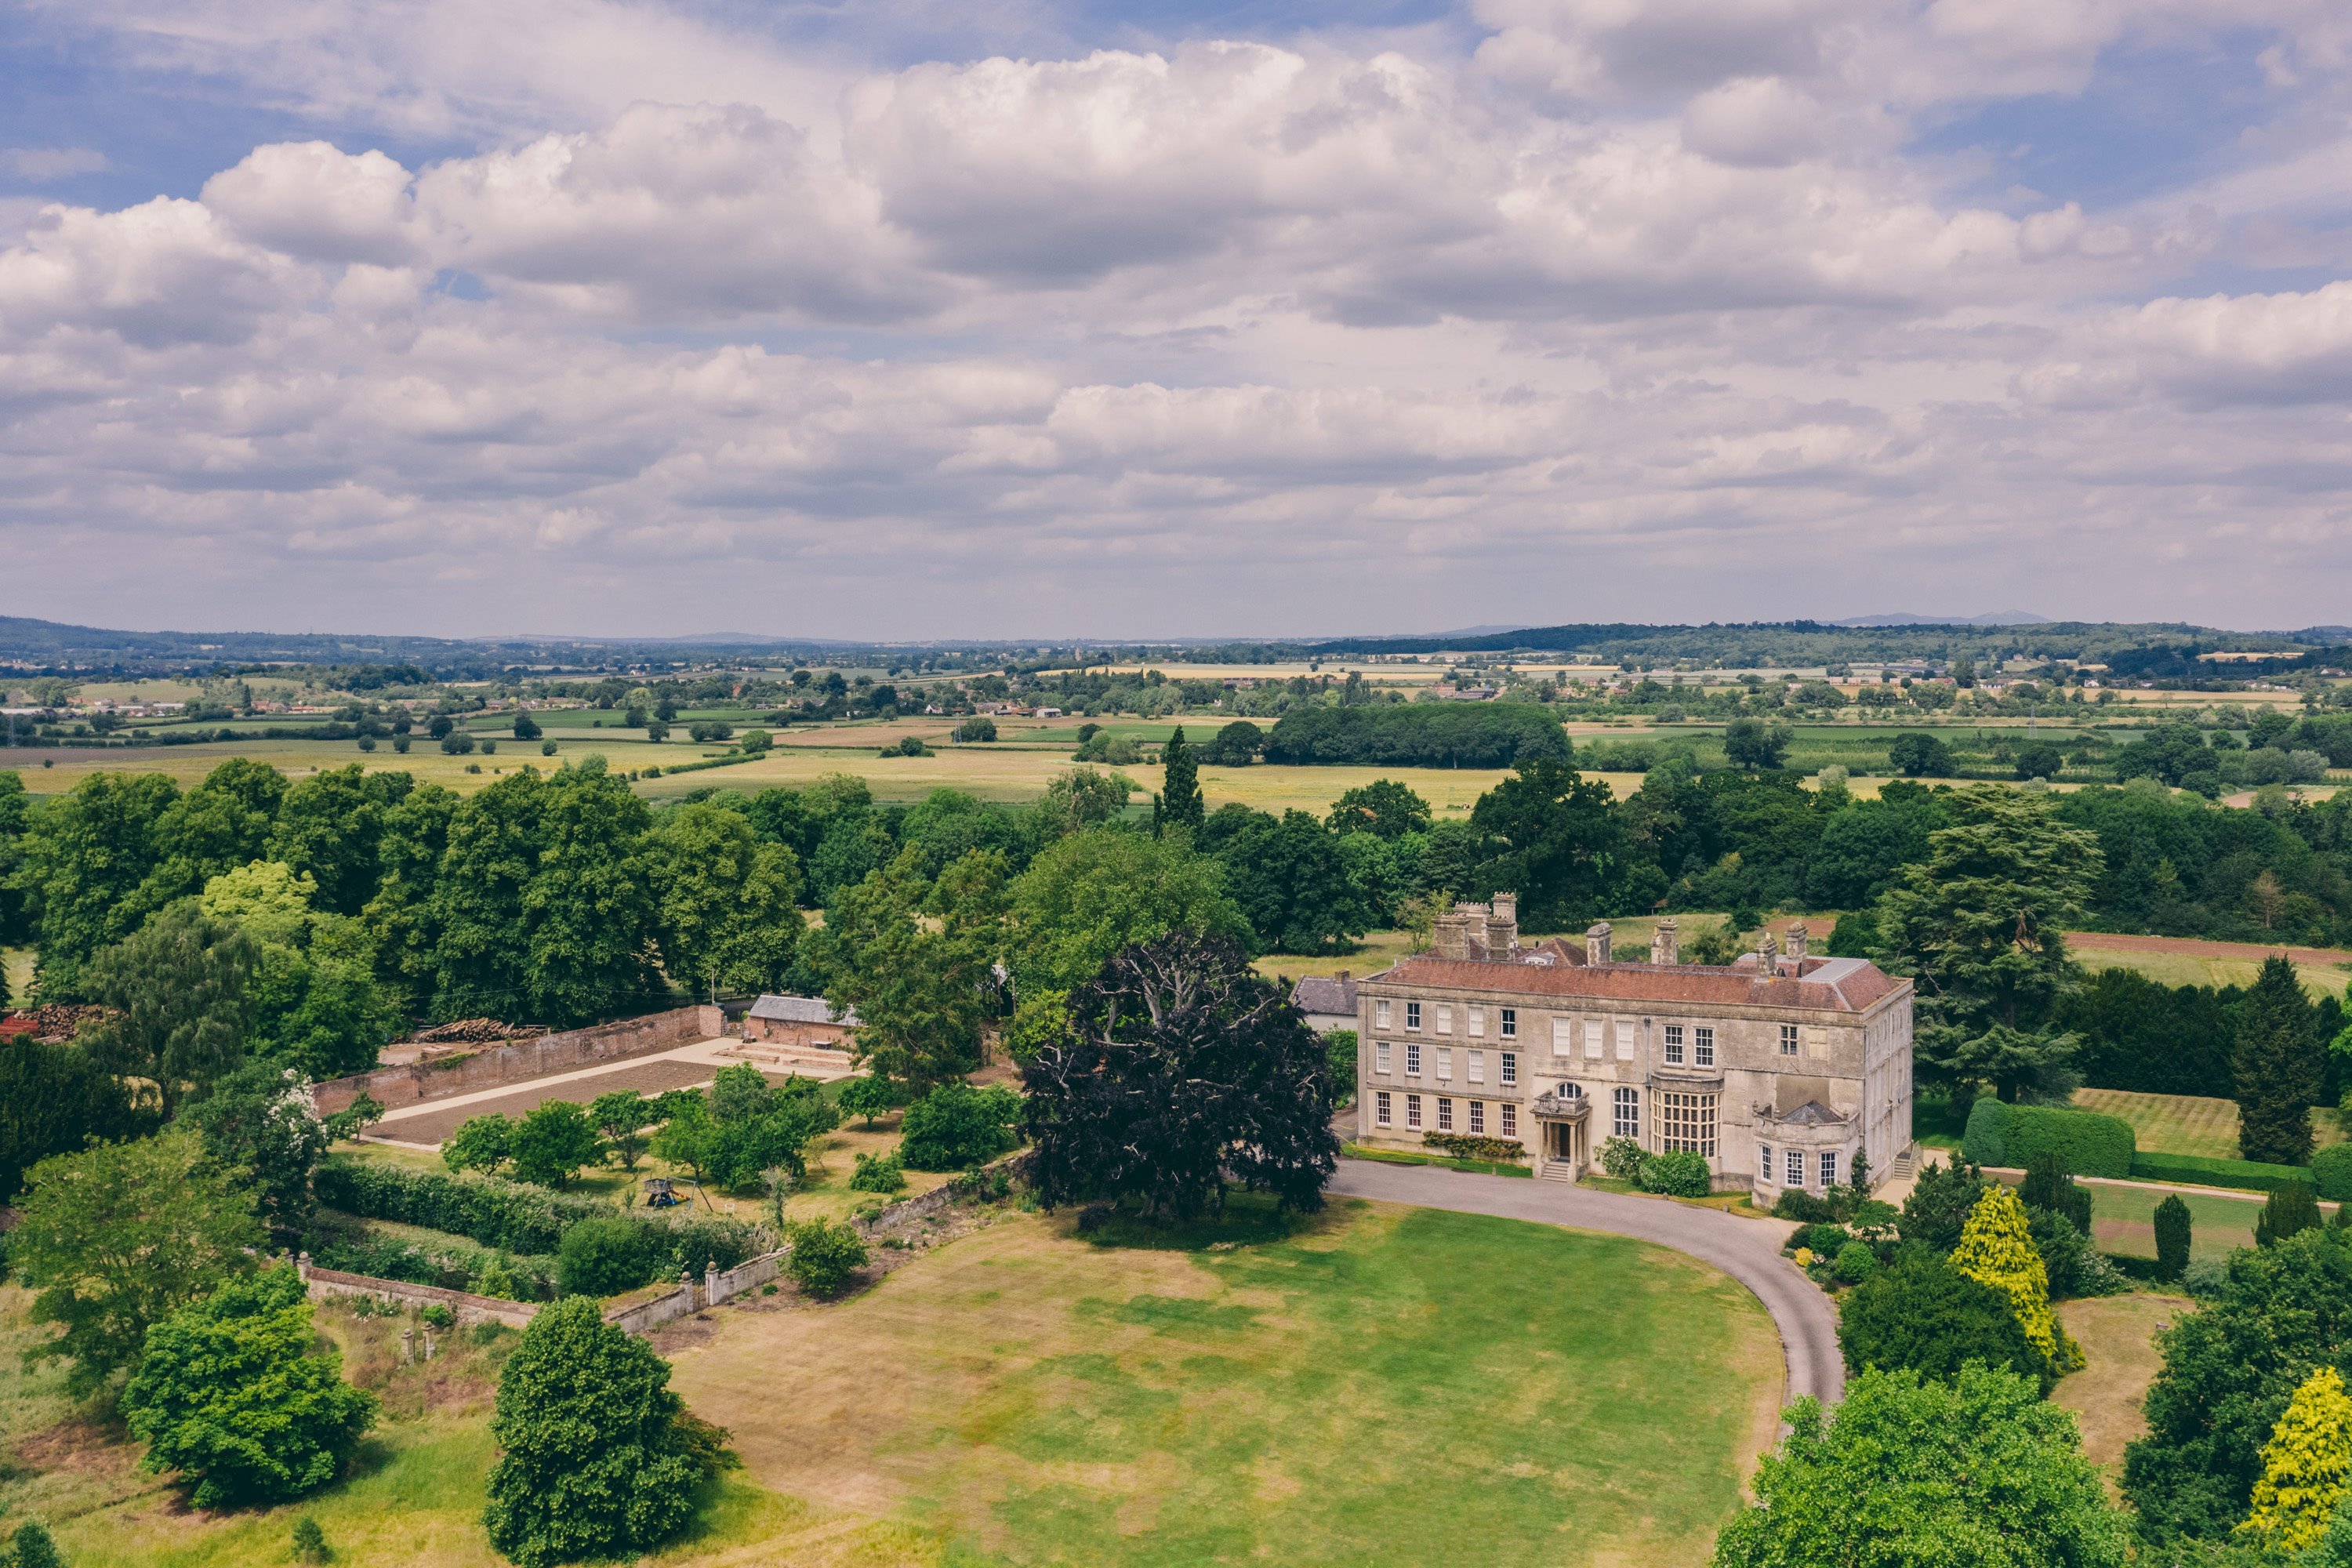 Sustainable wedding venue elmore court and walled garden from above